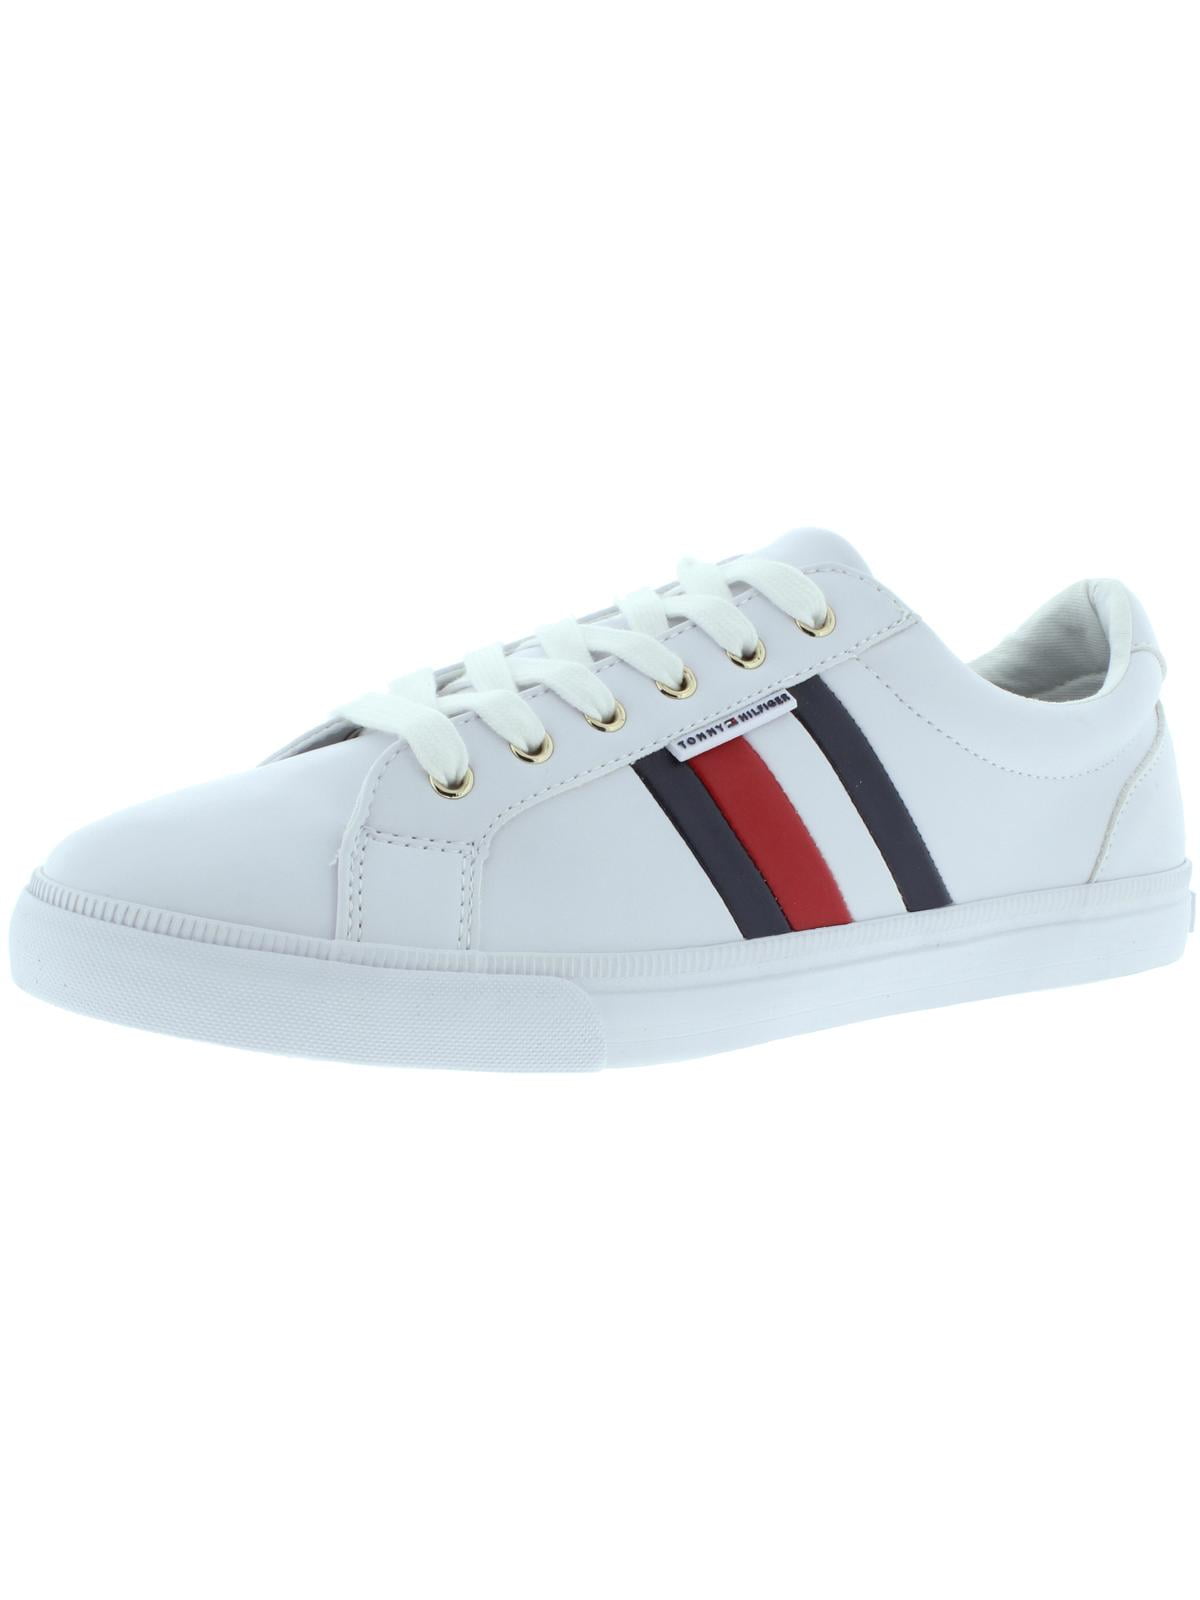 Tommy Hilfiger Logo Round Toe Sneakers in Blue for Men